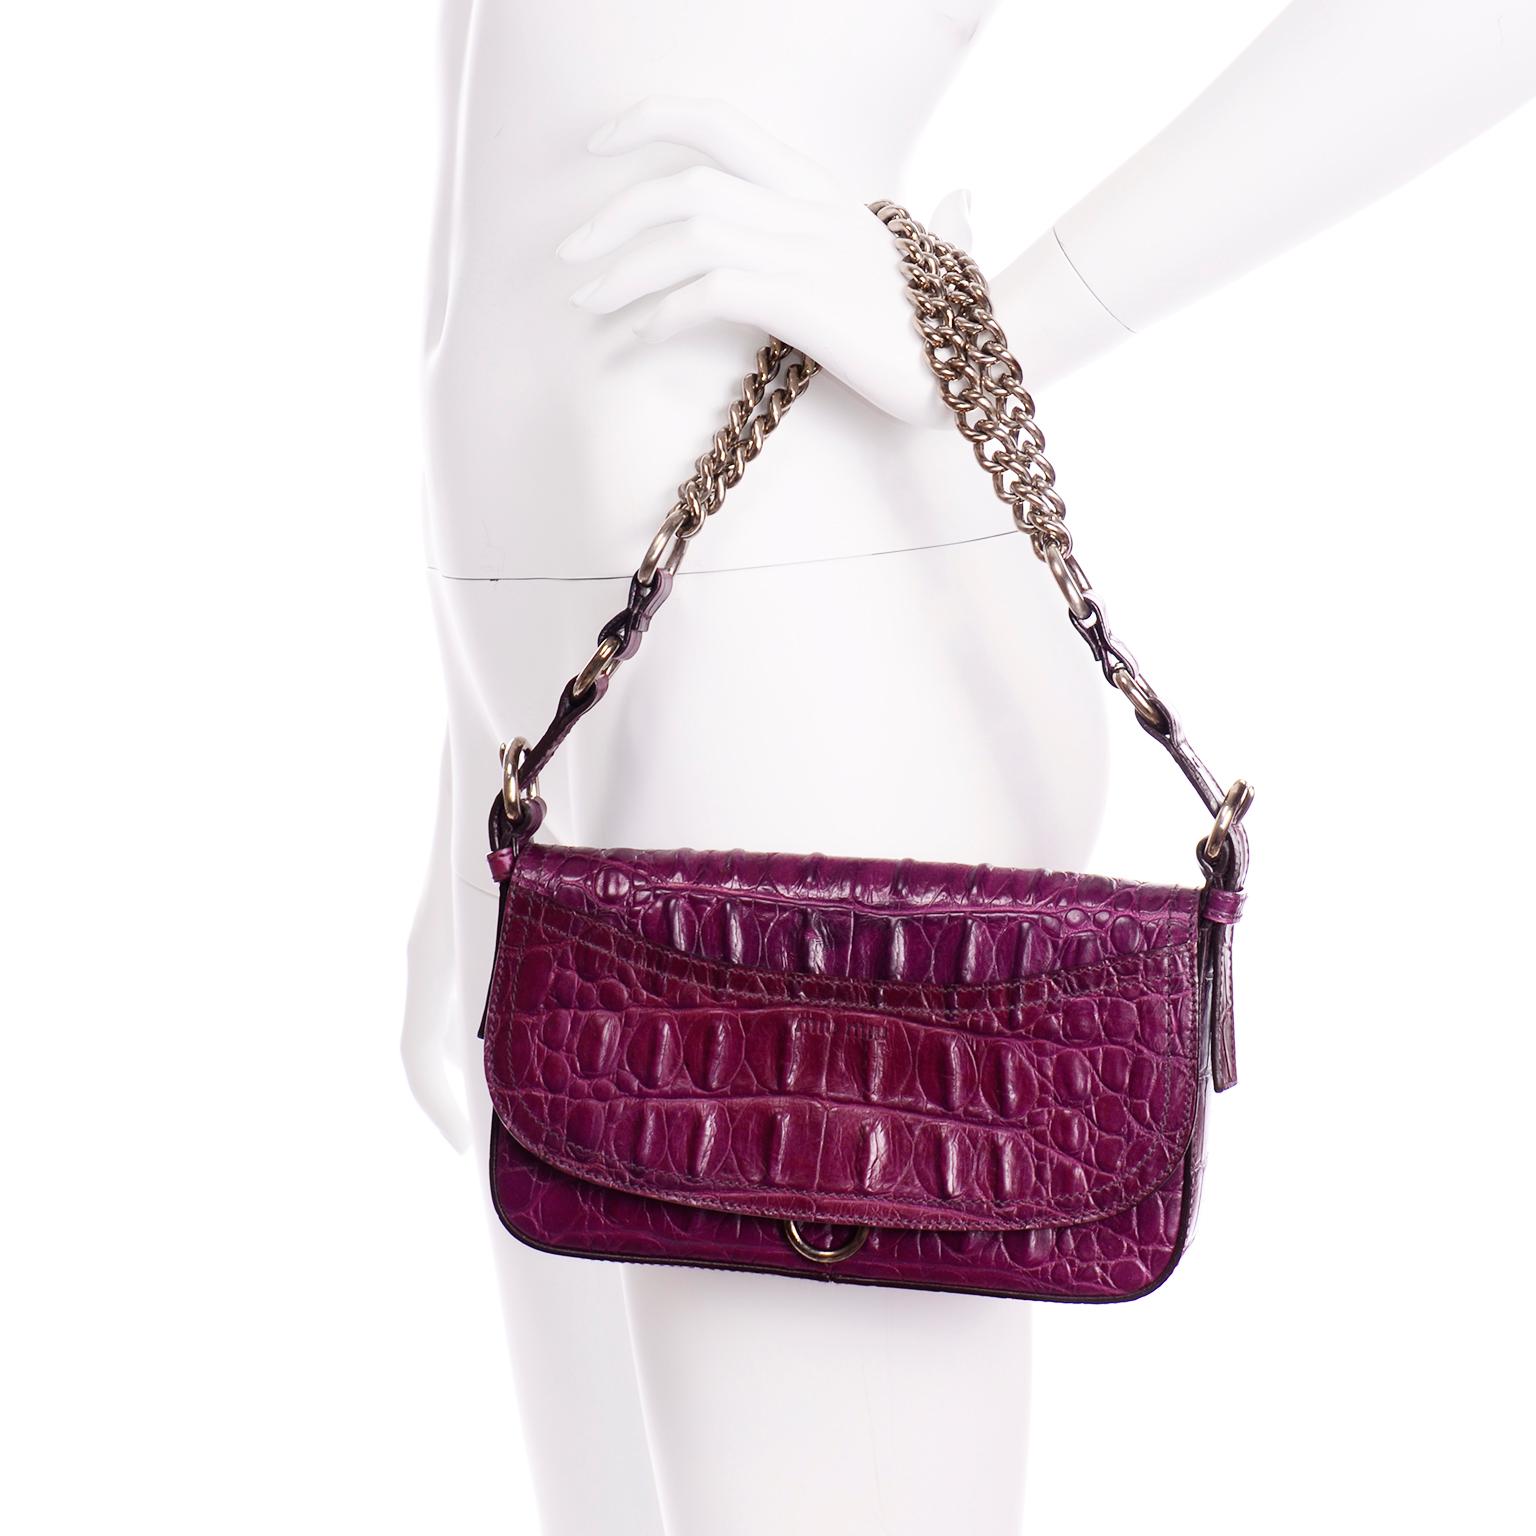 This is an amazing Miu Miu purple crocodile embossed baguette handbag with silver chain hardware. The front of the bag has a small slip pocket on the flap and the bag  is secured with a metal snap button and has a silver hoop at the base of the